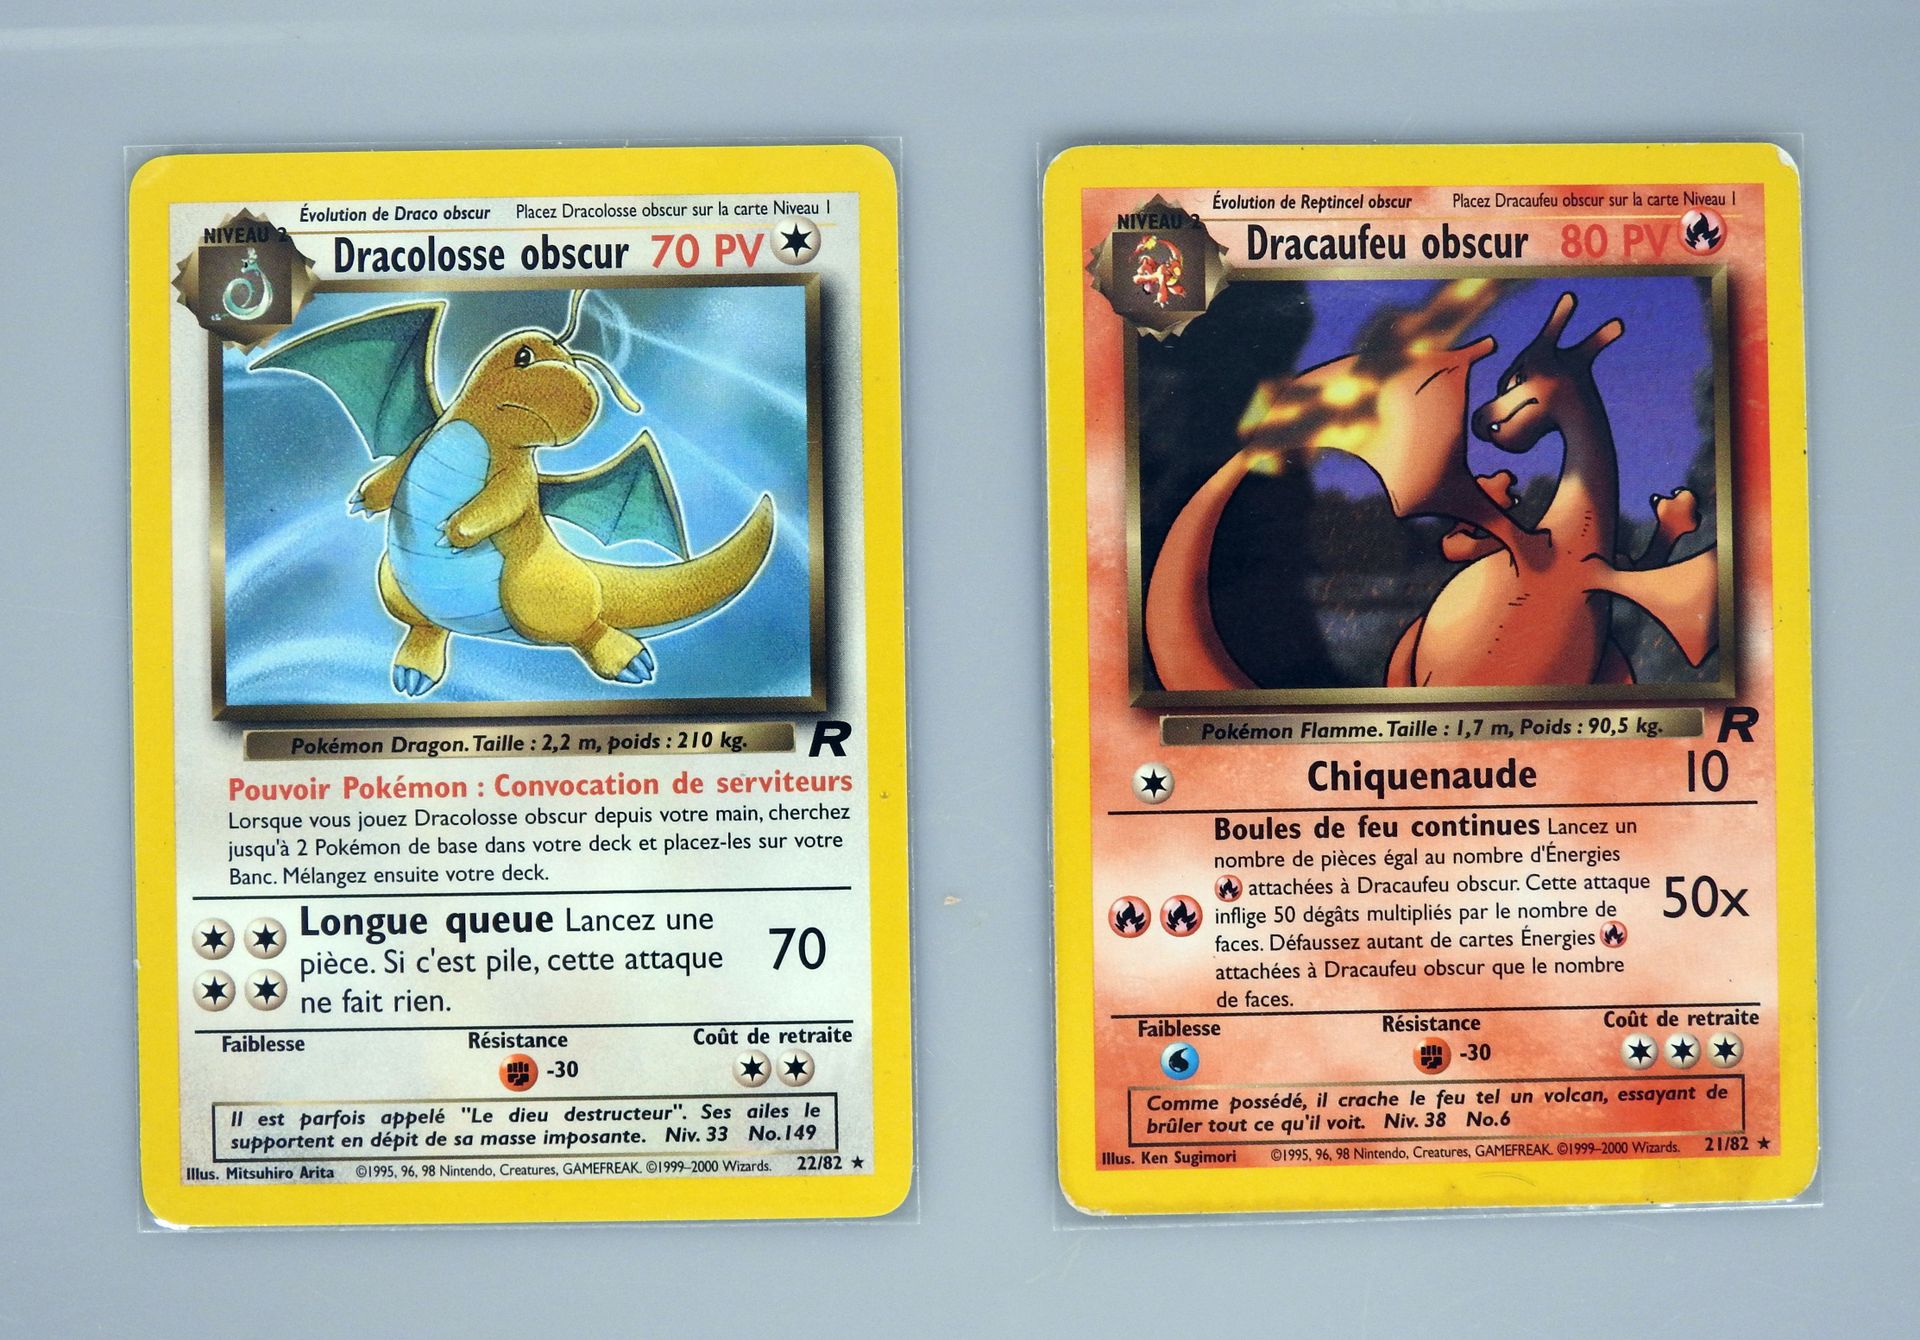 Null TEAM ROCKET

Set of two rare cards:

Obscure Fireball Ed 2 21/82

Obscure D&hellip;